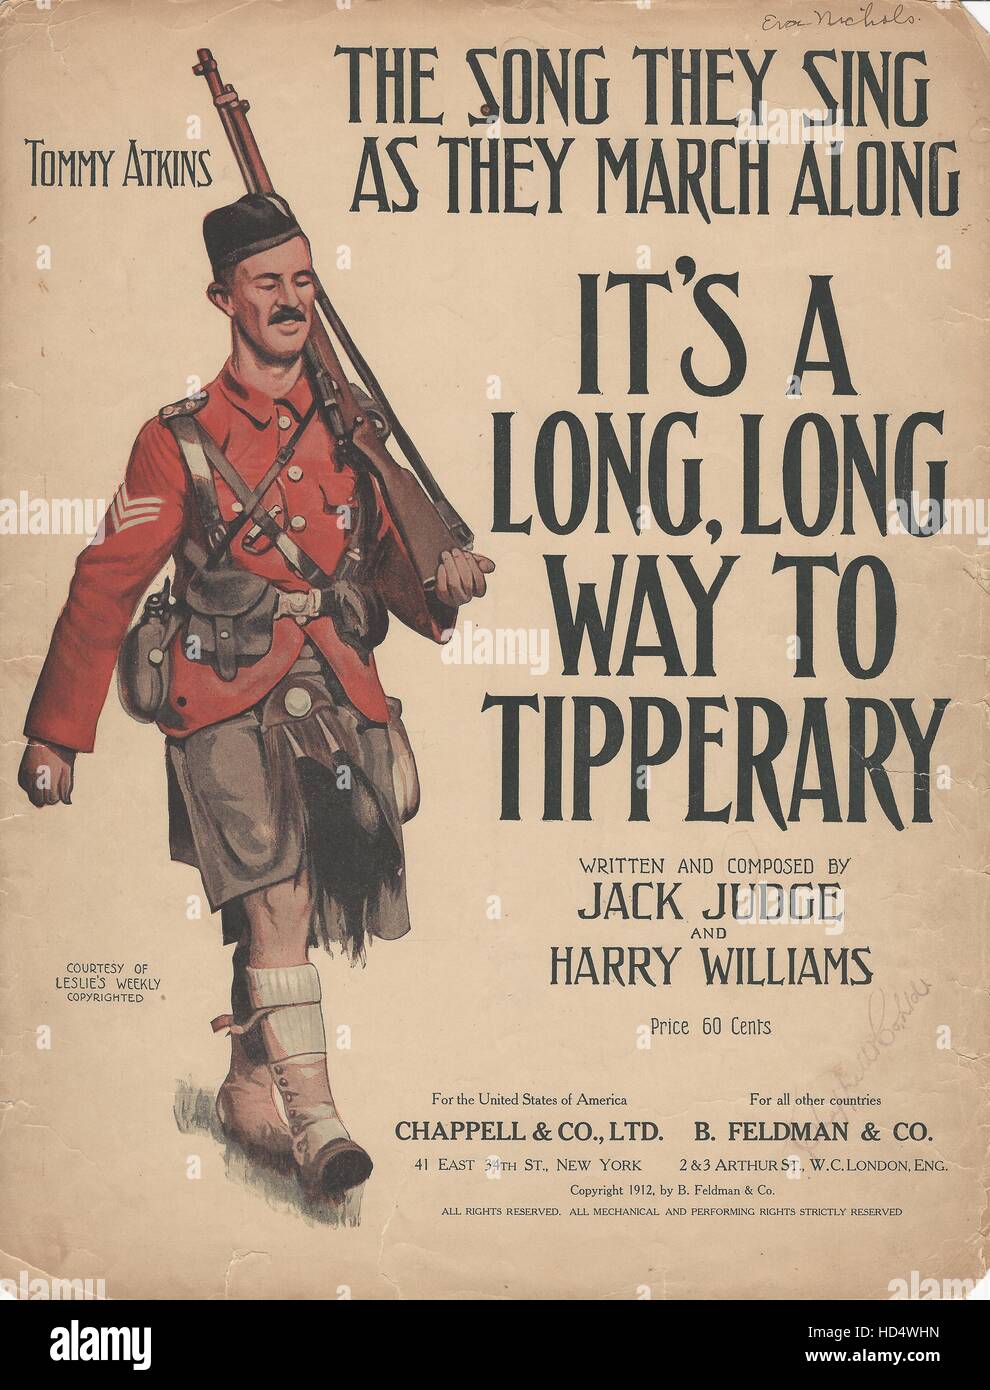 'It's a Long, Long Way to Tipperary' 1912 Sheet Music Cover. Stock Photo